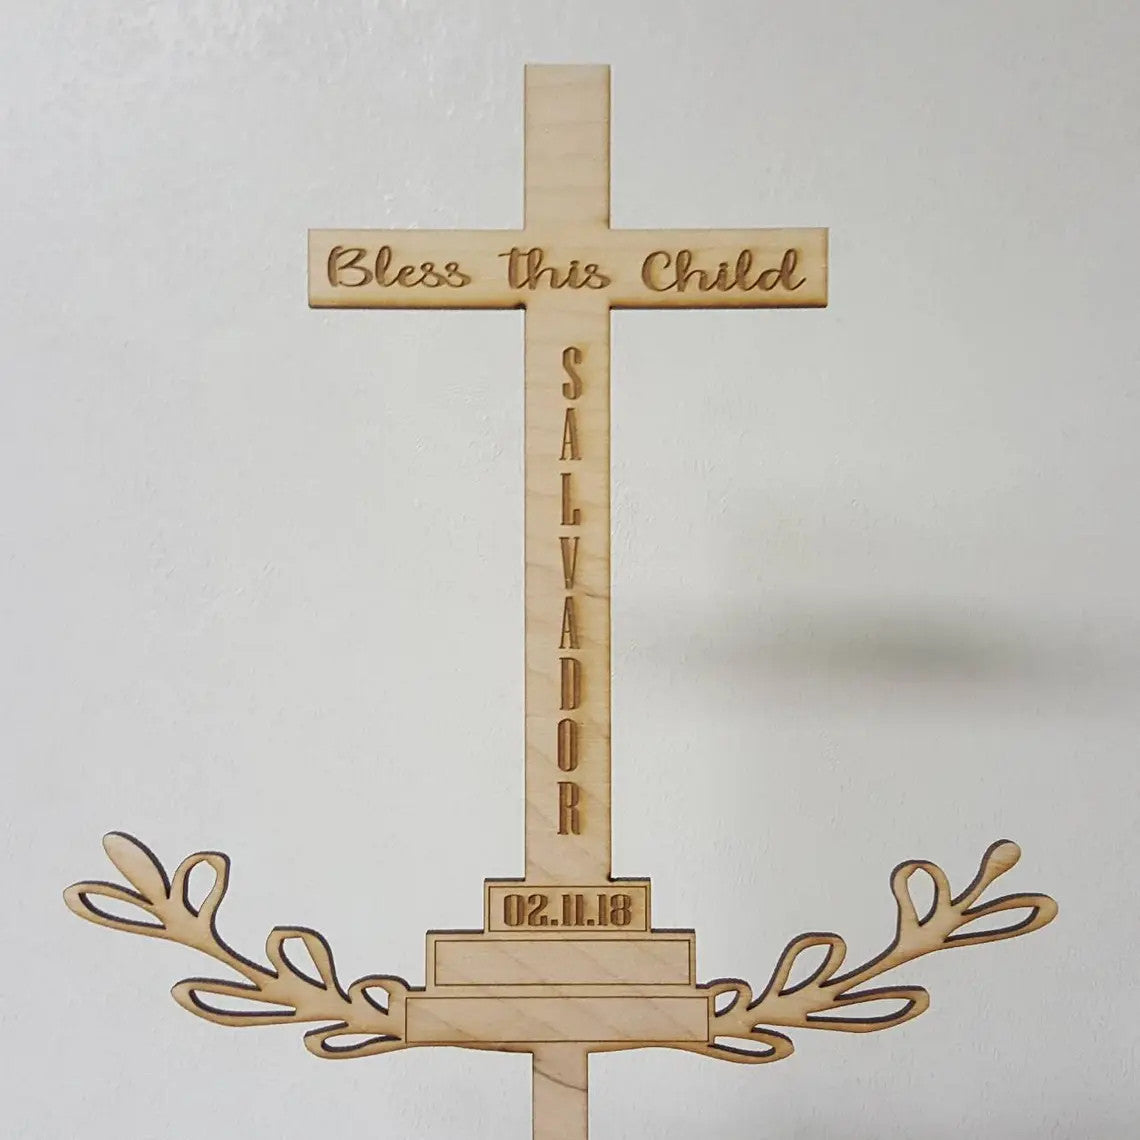 Bless this Child Wood Cross Cake Topper or Wall Decoration Baptism Christening with Custom Name and Date